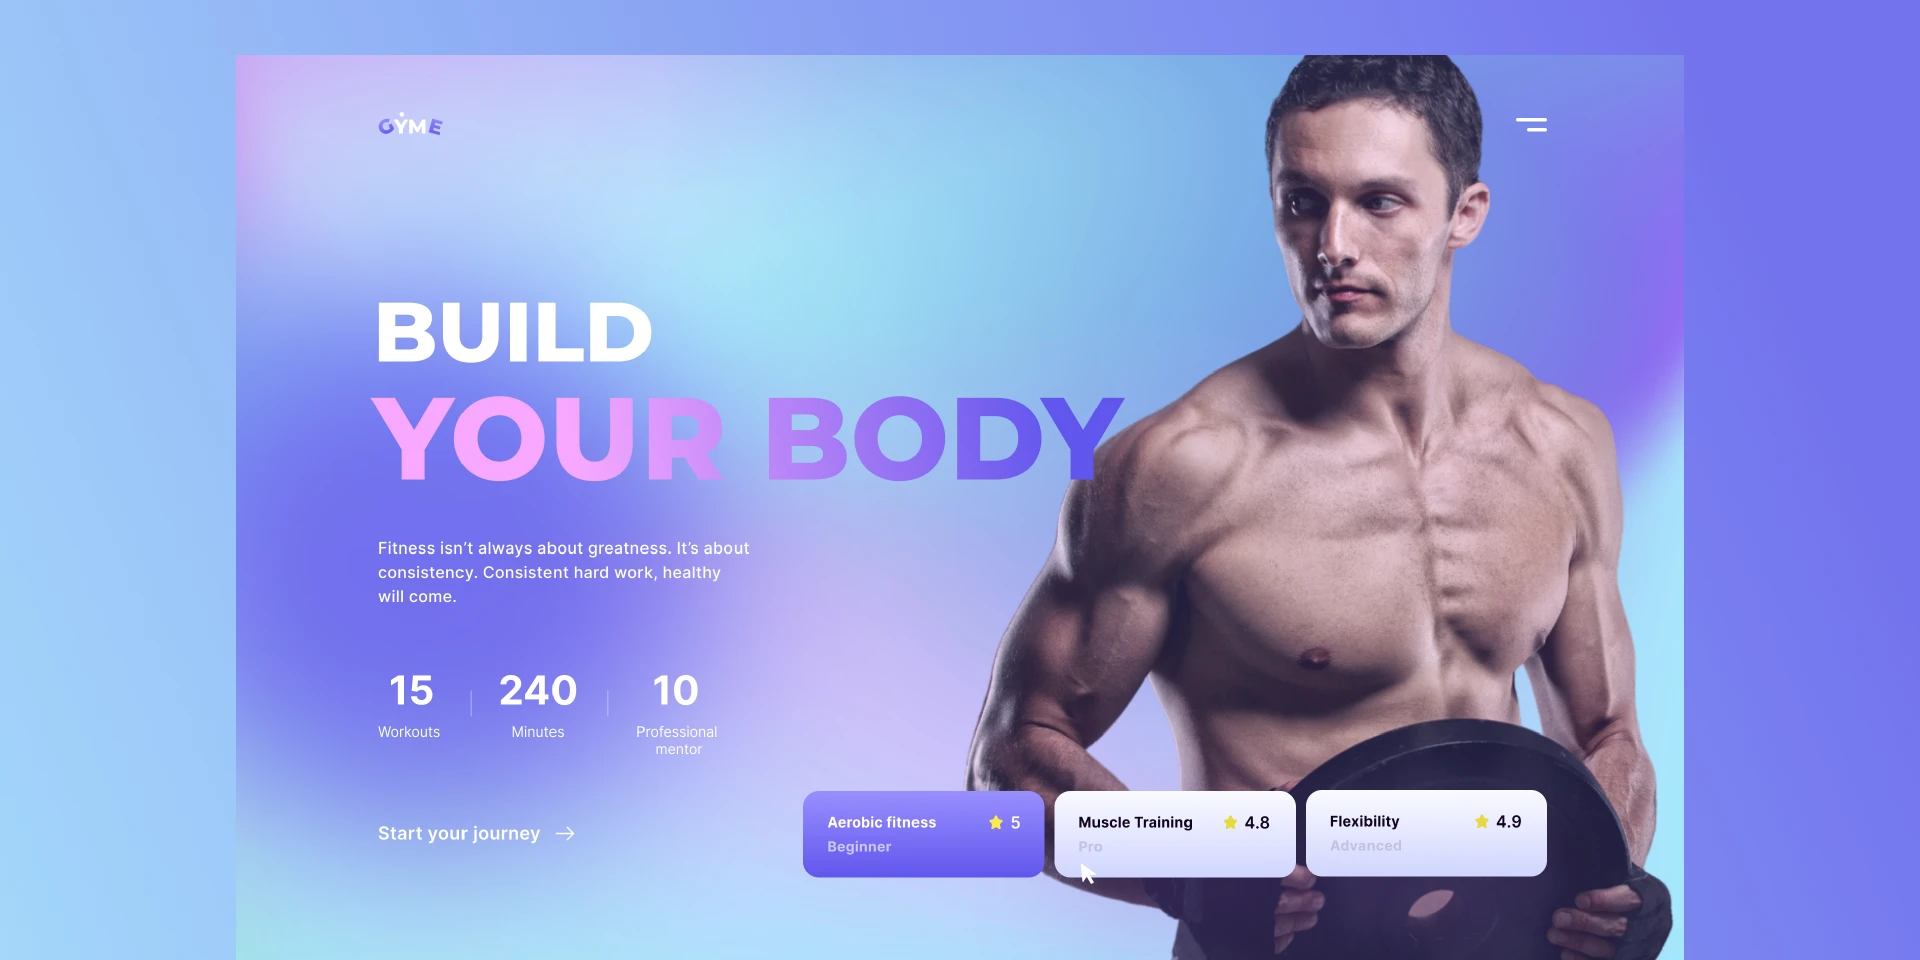 GYME - Workout Services Landing Page for Figma and Adobe XD